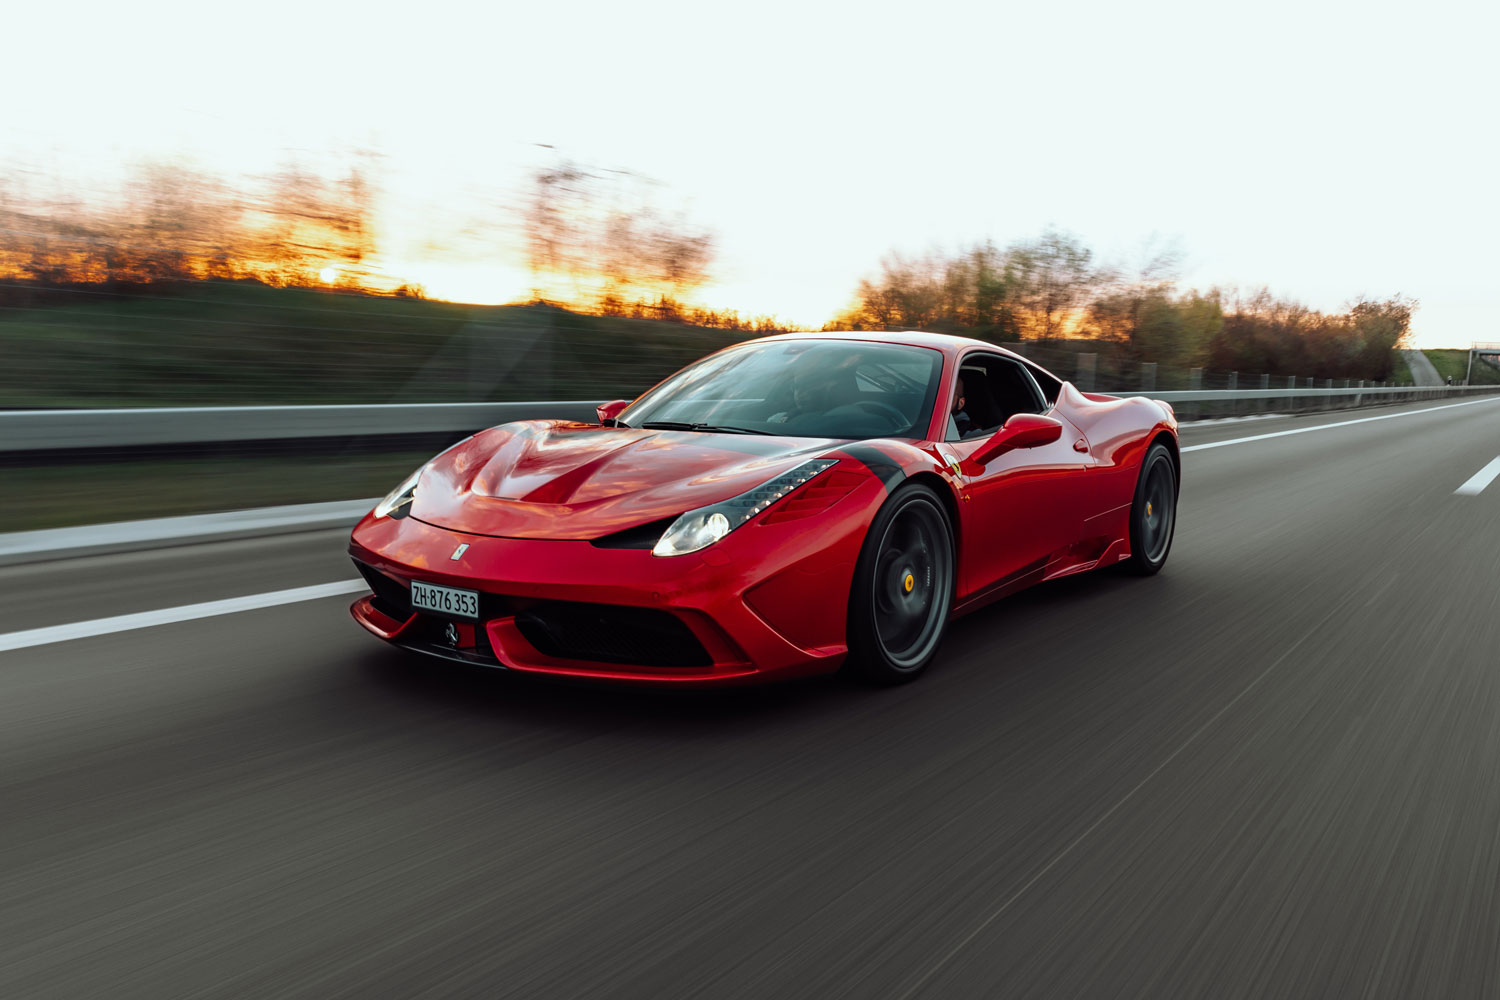 Bringing you some surprising facts about Ferrari